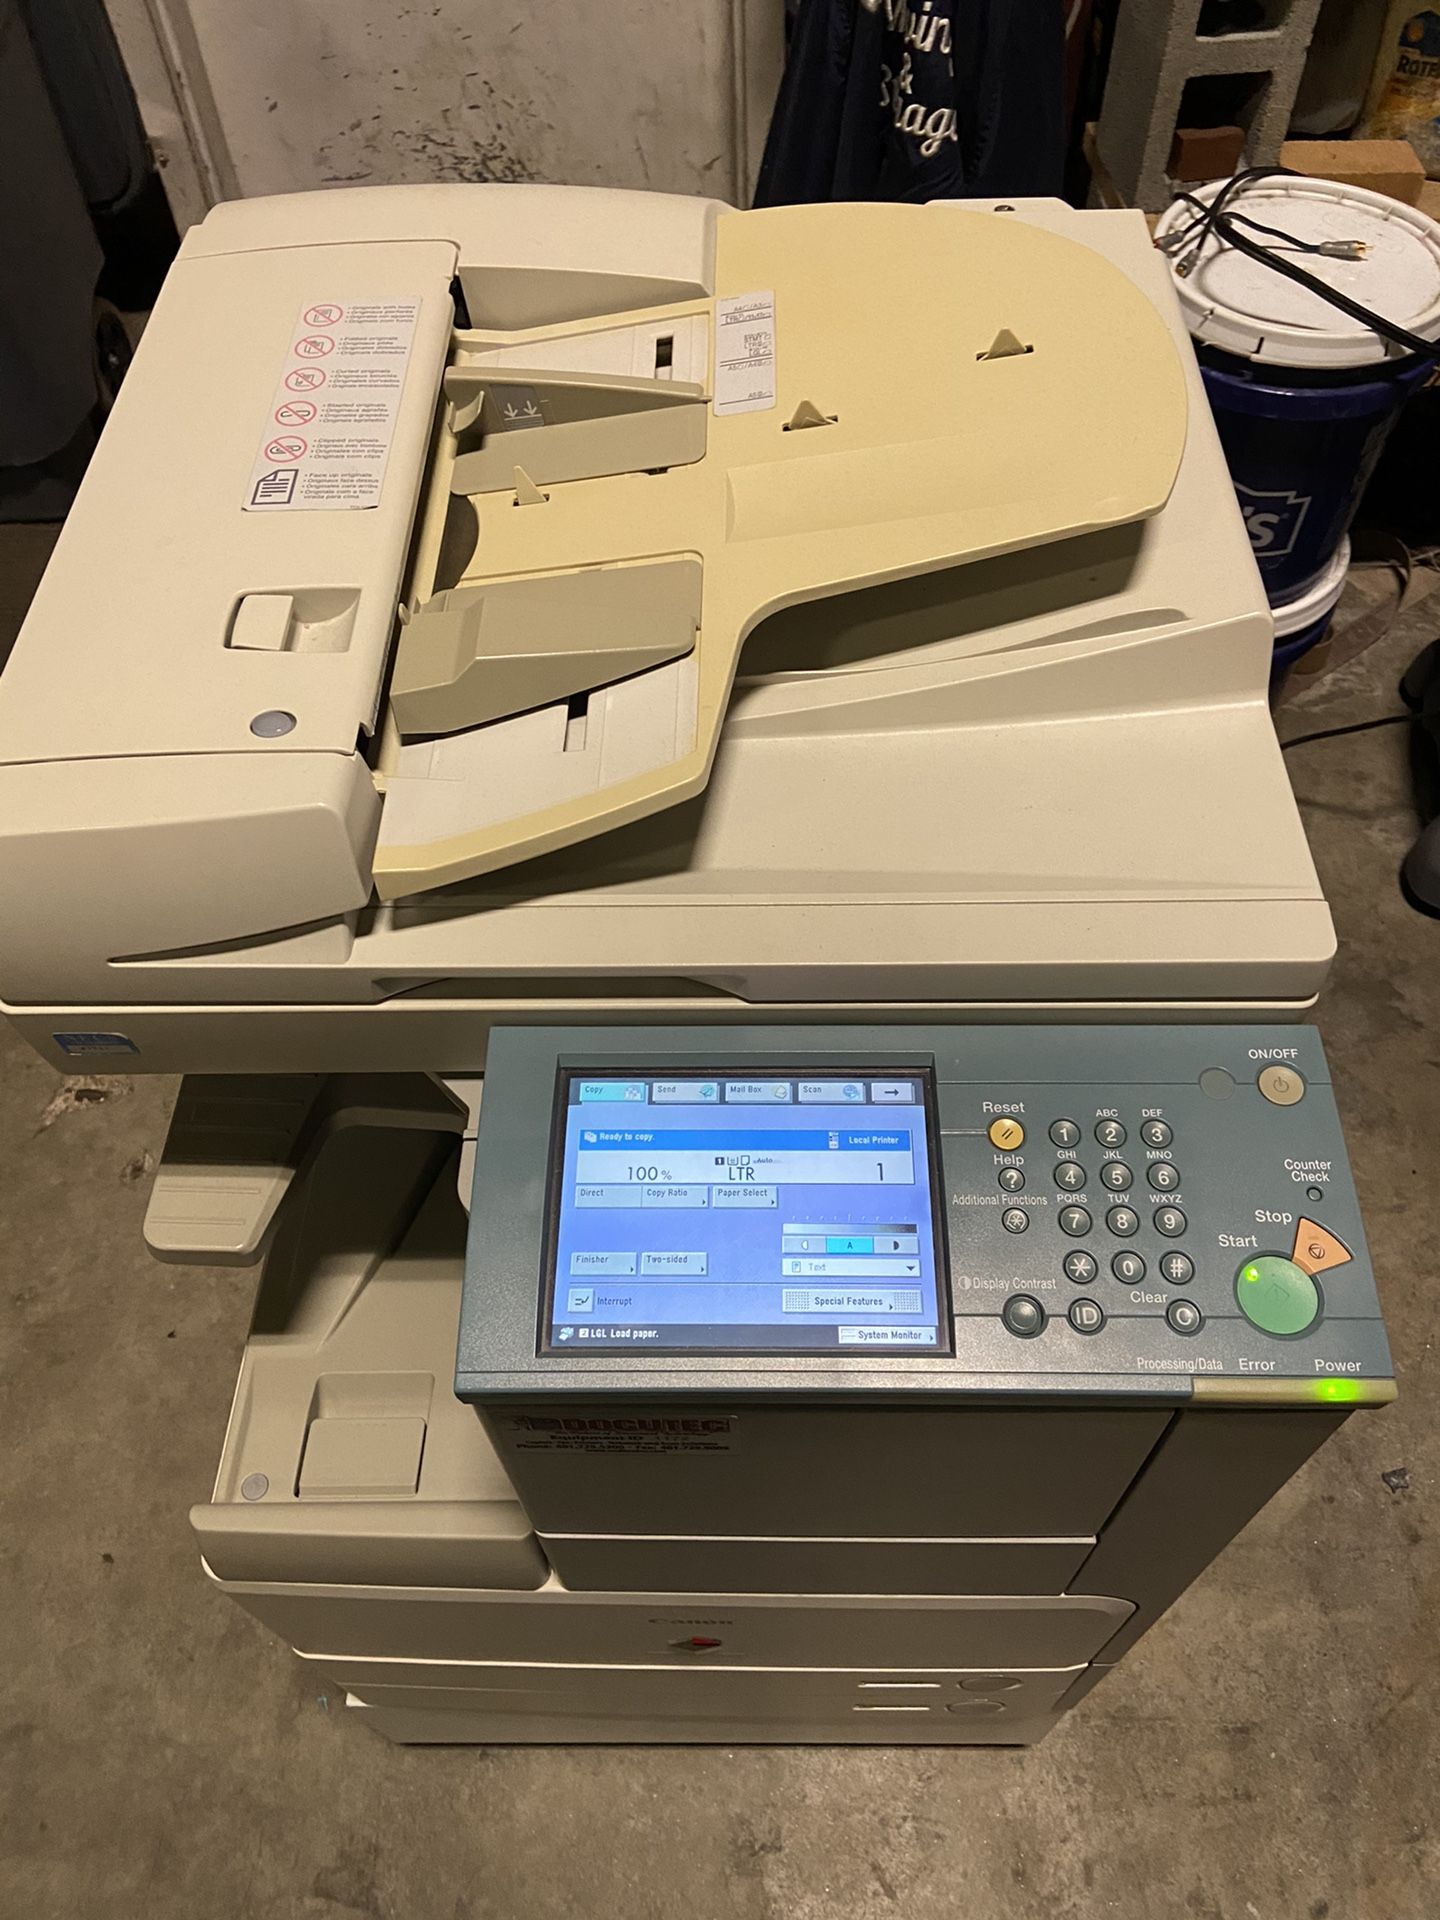 Canon Image Runner 3570 Copier Printer with extra toner